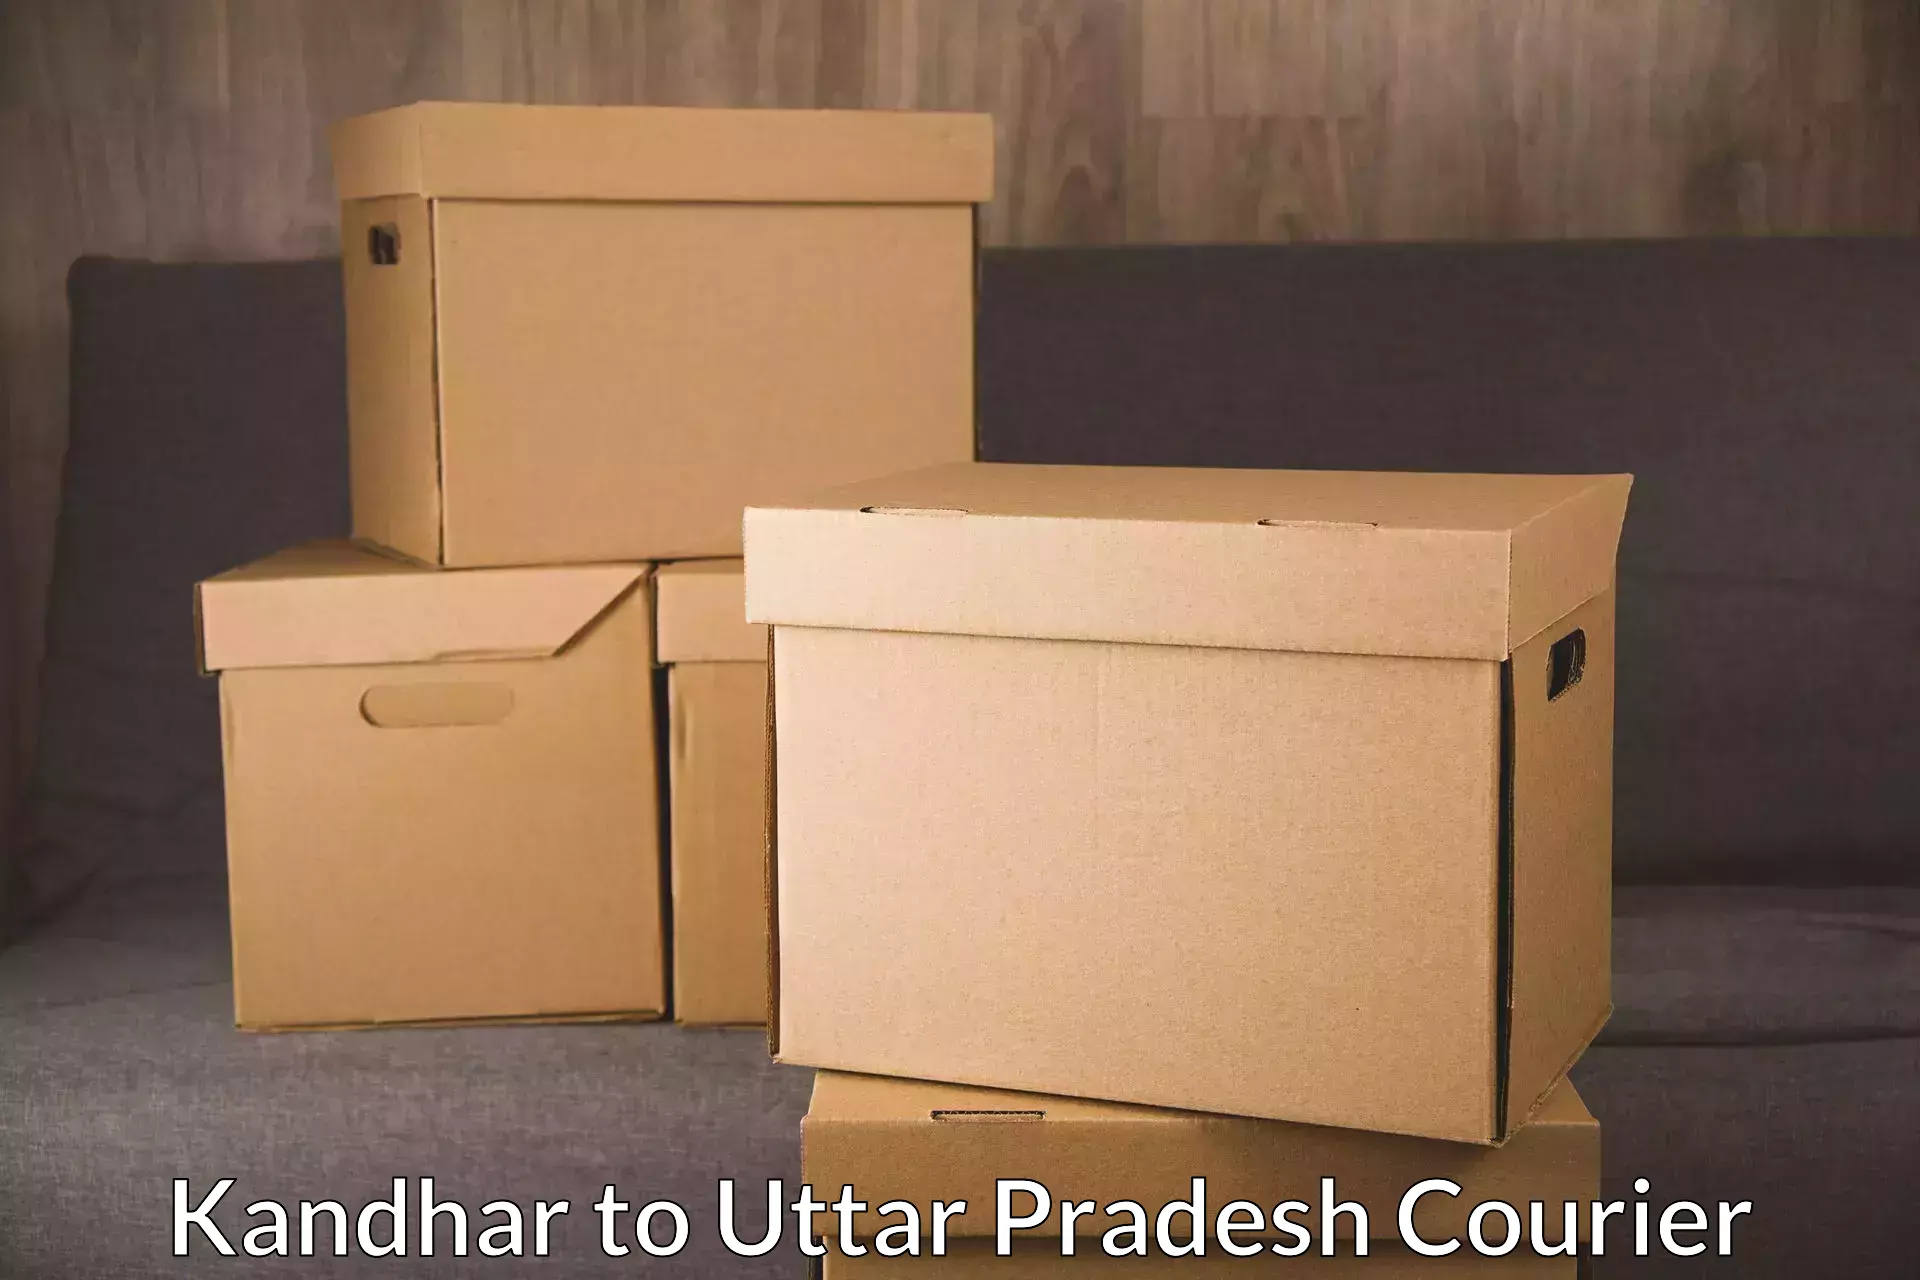 Expedited shipping methods Kandhar to Hathras